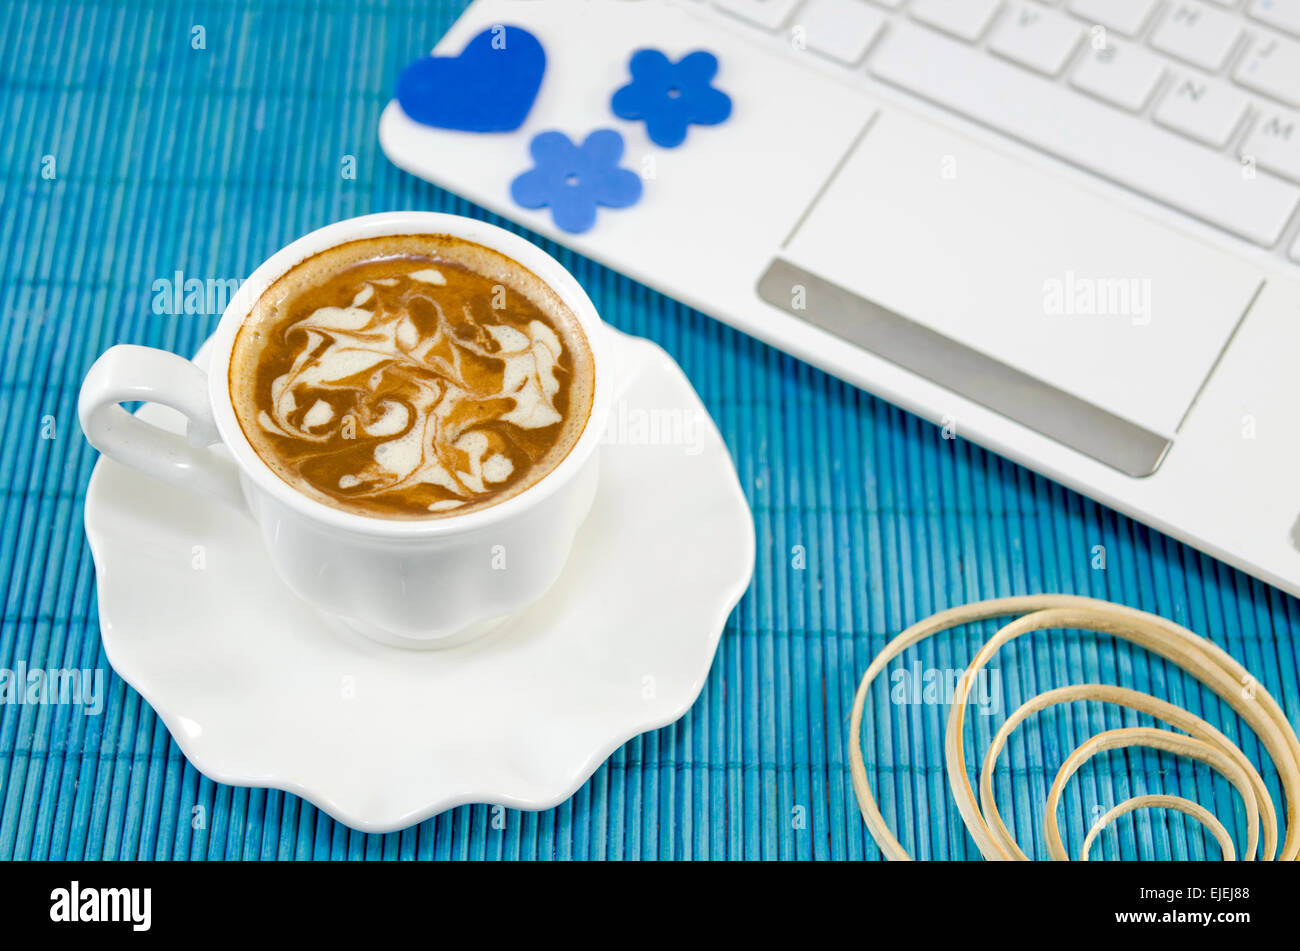 White cup of coffee with decorated foam and a white lap top on a blue tablecloth. Stock Photo